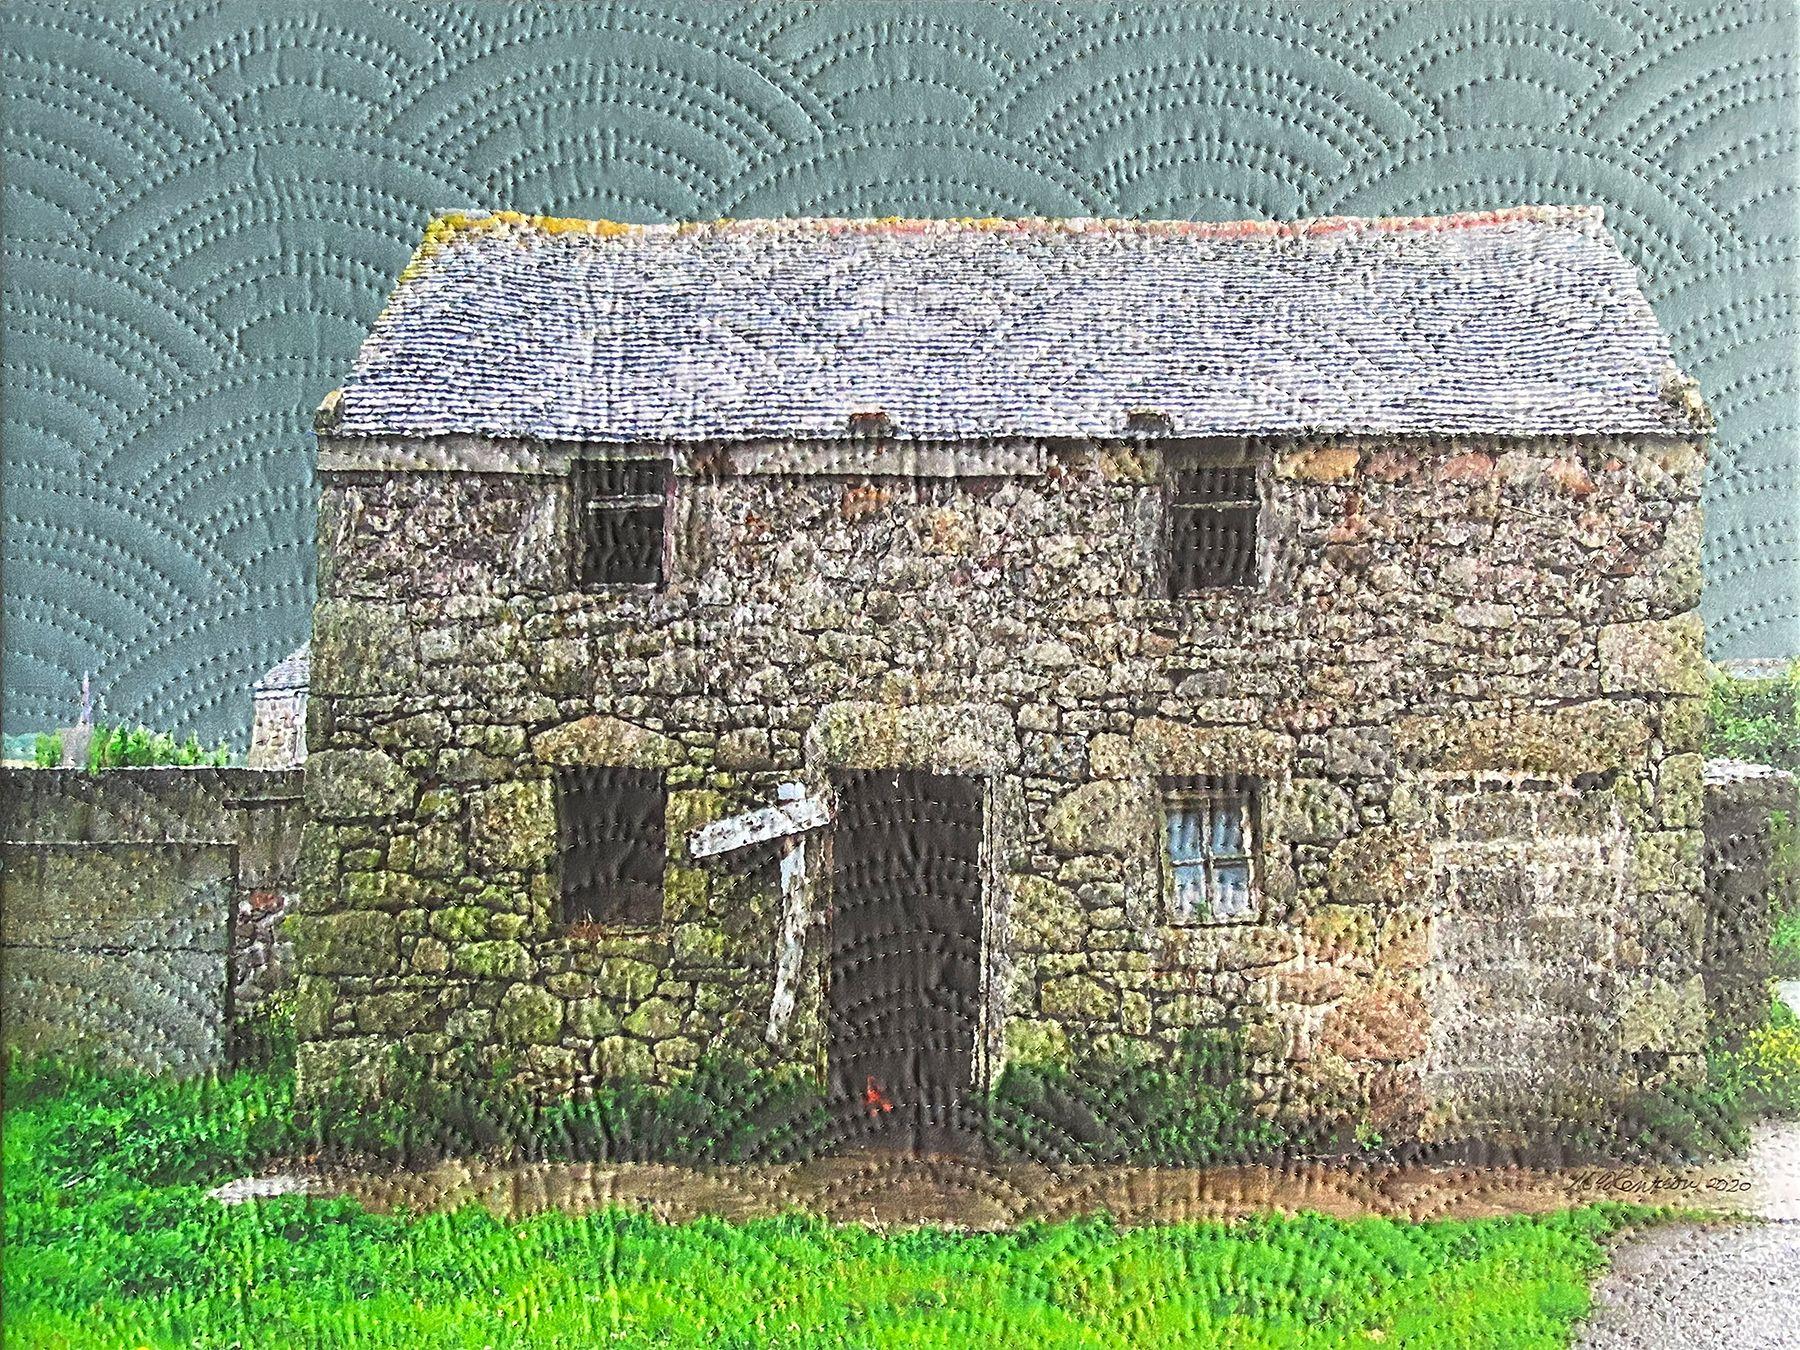 Cape Cornwall England 1, Mixed Media on Canvas - Mixed Media Art by Marilyn Henrion